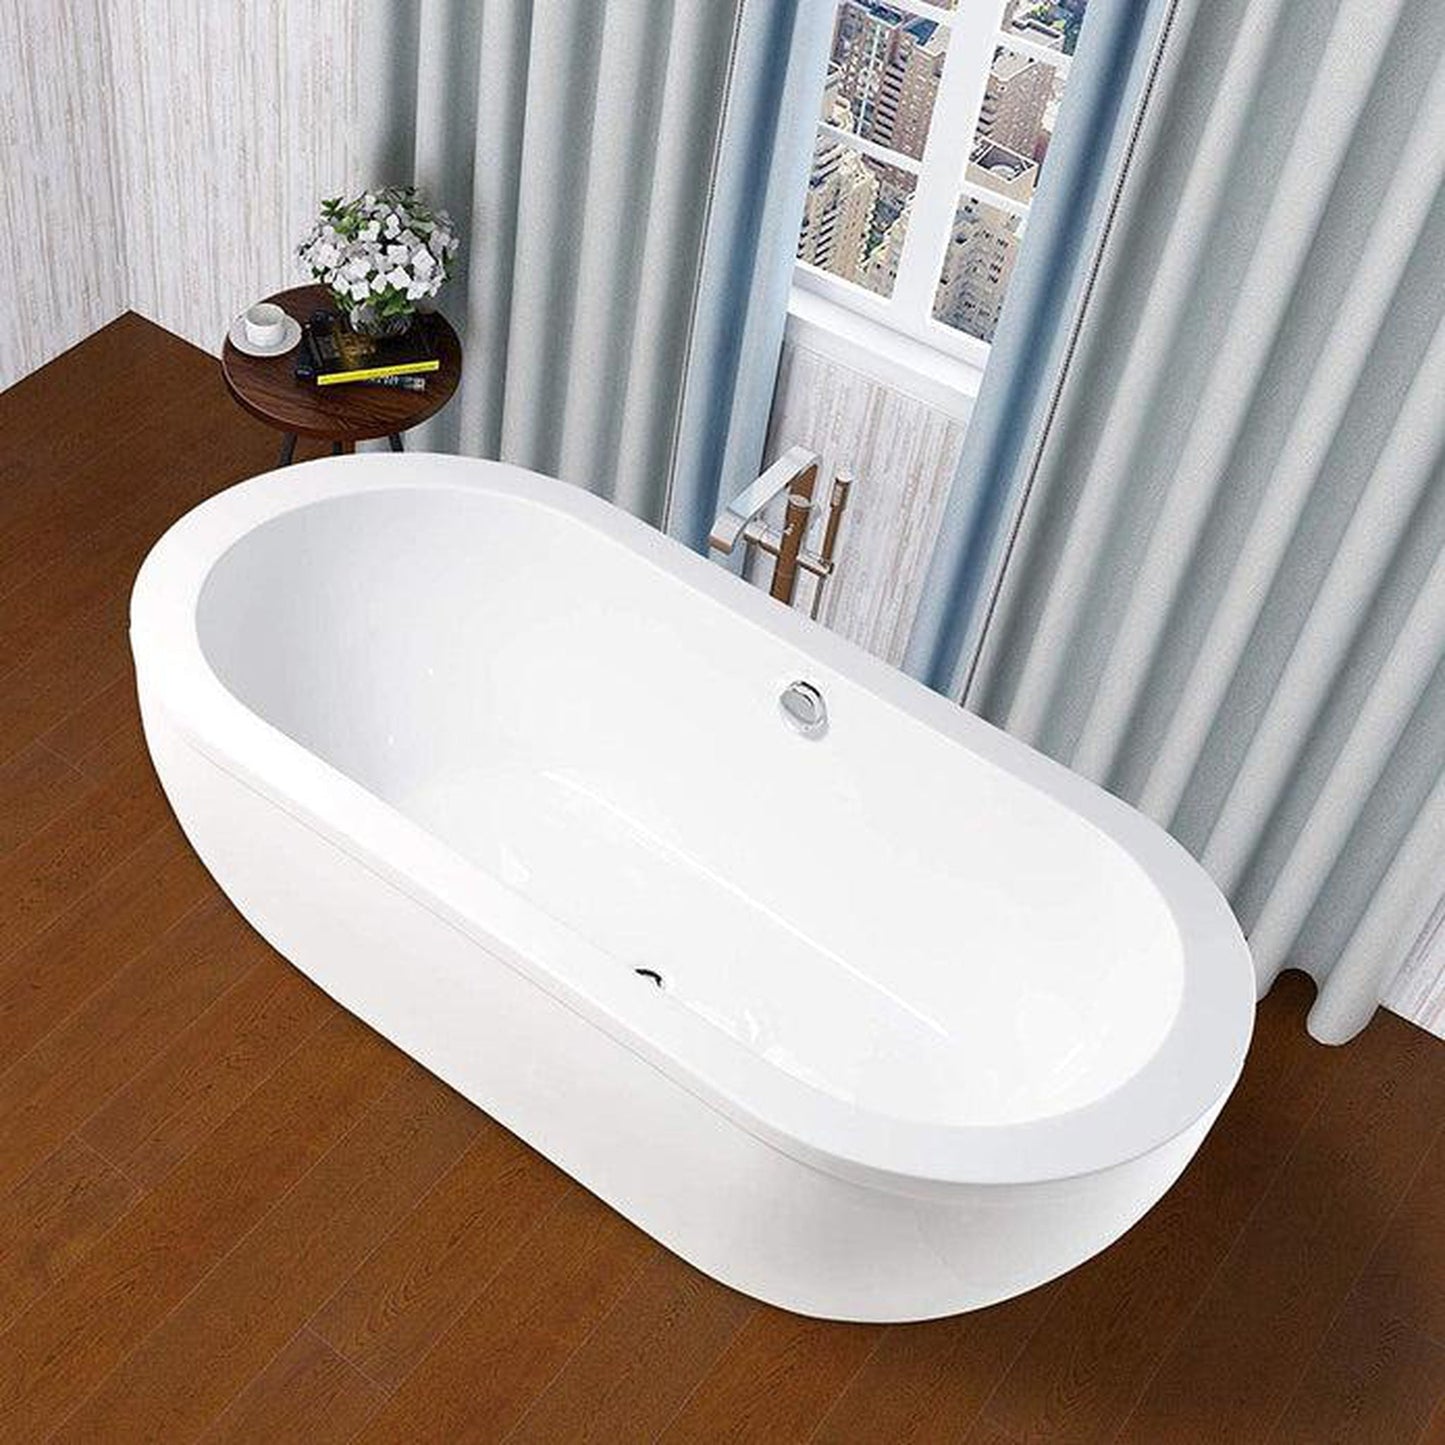 Vanity Art 71" W x 24" H White Acrylic Freestanding Bathtub With Polished Chrome Round Overflow and Pop-up Drain